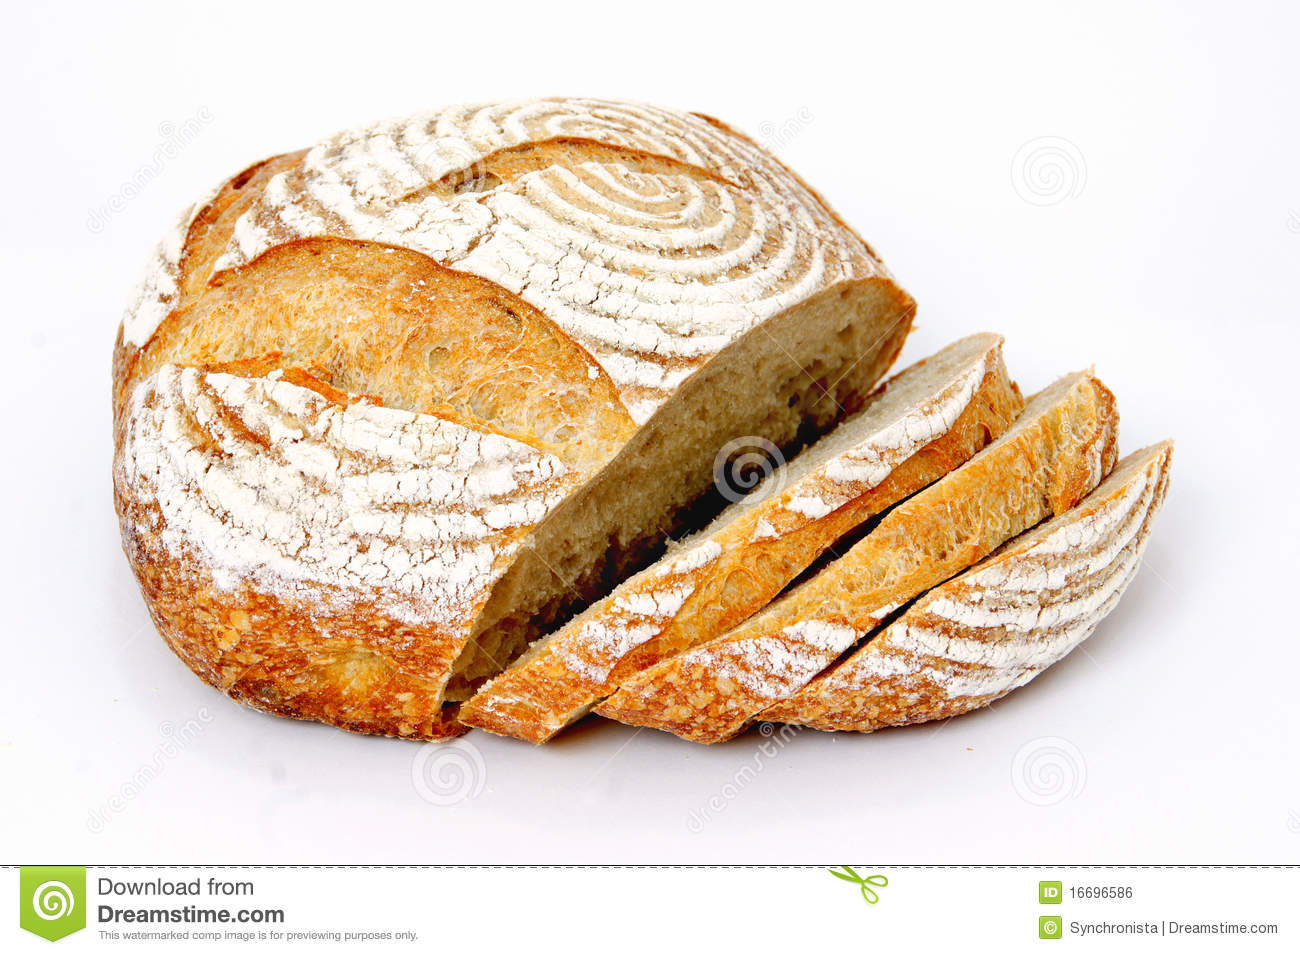 Loaf Of Sliced Sourdough Bread Royalty Free Stock Image   Image    